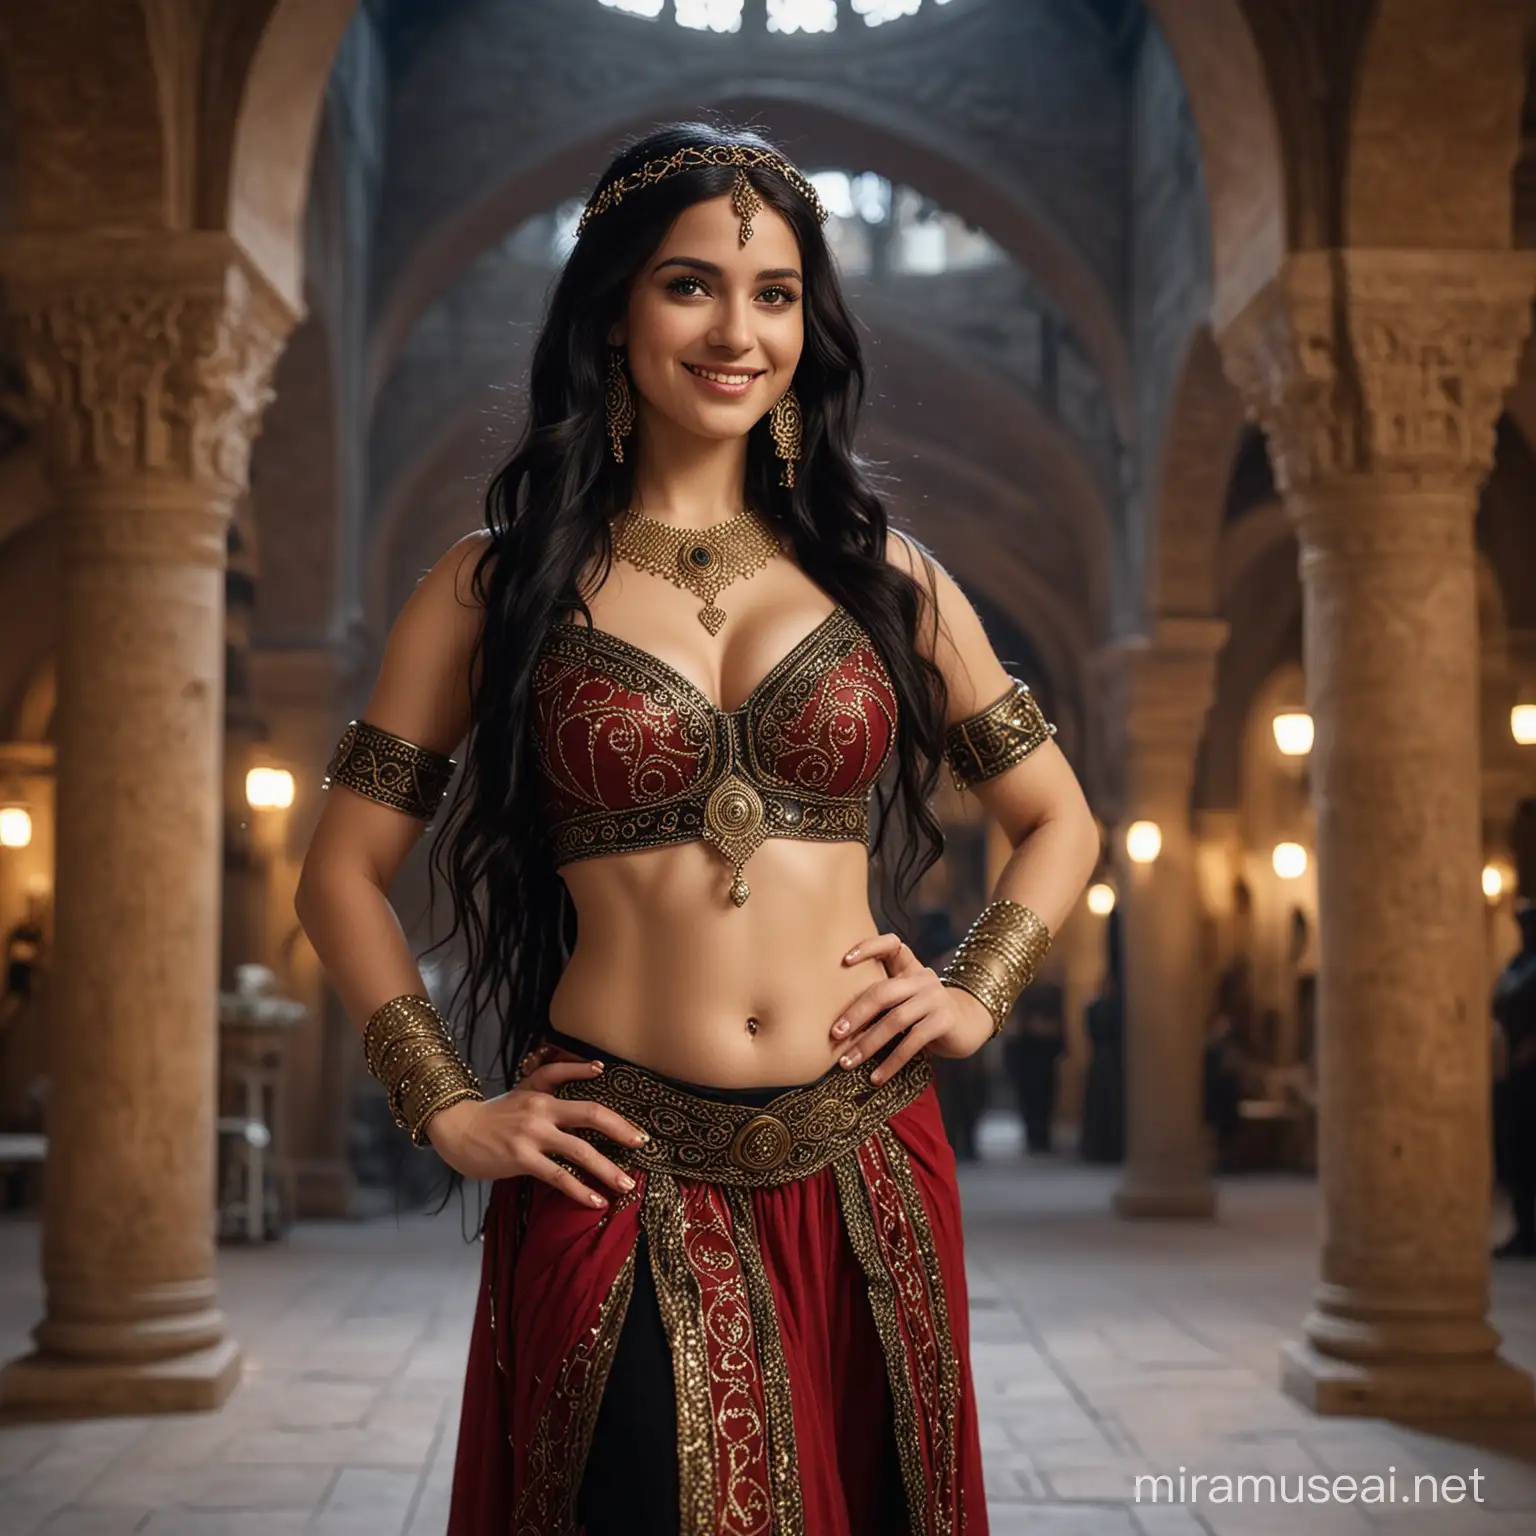 A good-looking female elf in the style of LOTR with long black hair in a medieval Arabic noble belly dance costume stands in a large Roman domed hall and smiles. The scene takes place at night. Sigma 85mm F/1.4